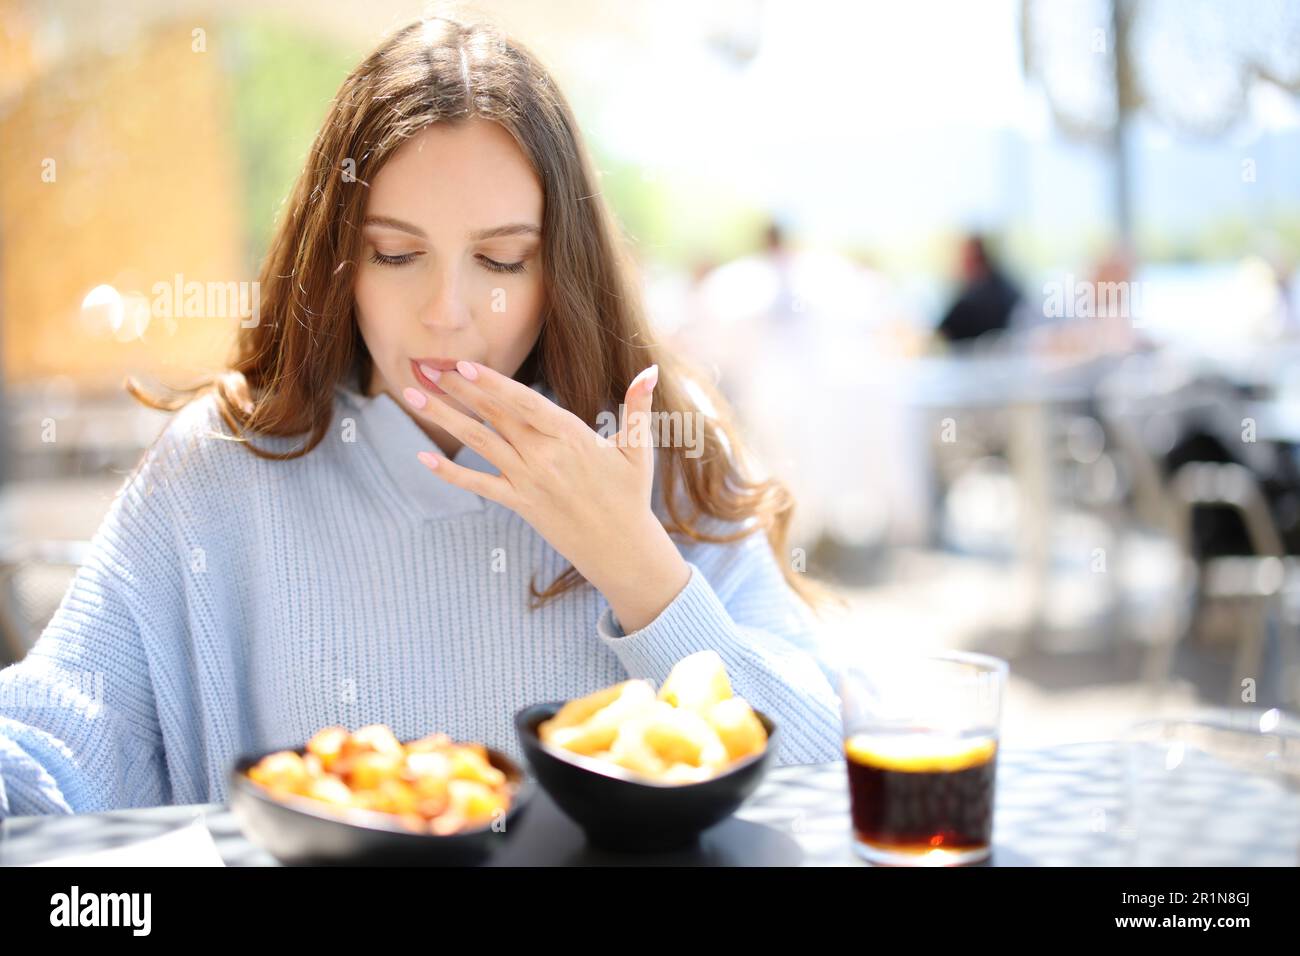 Restaurant customer eating and licking finger in a terrace Stock Photo